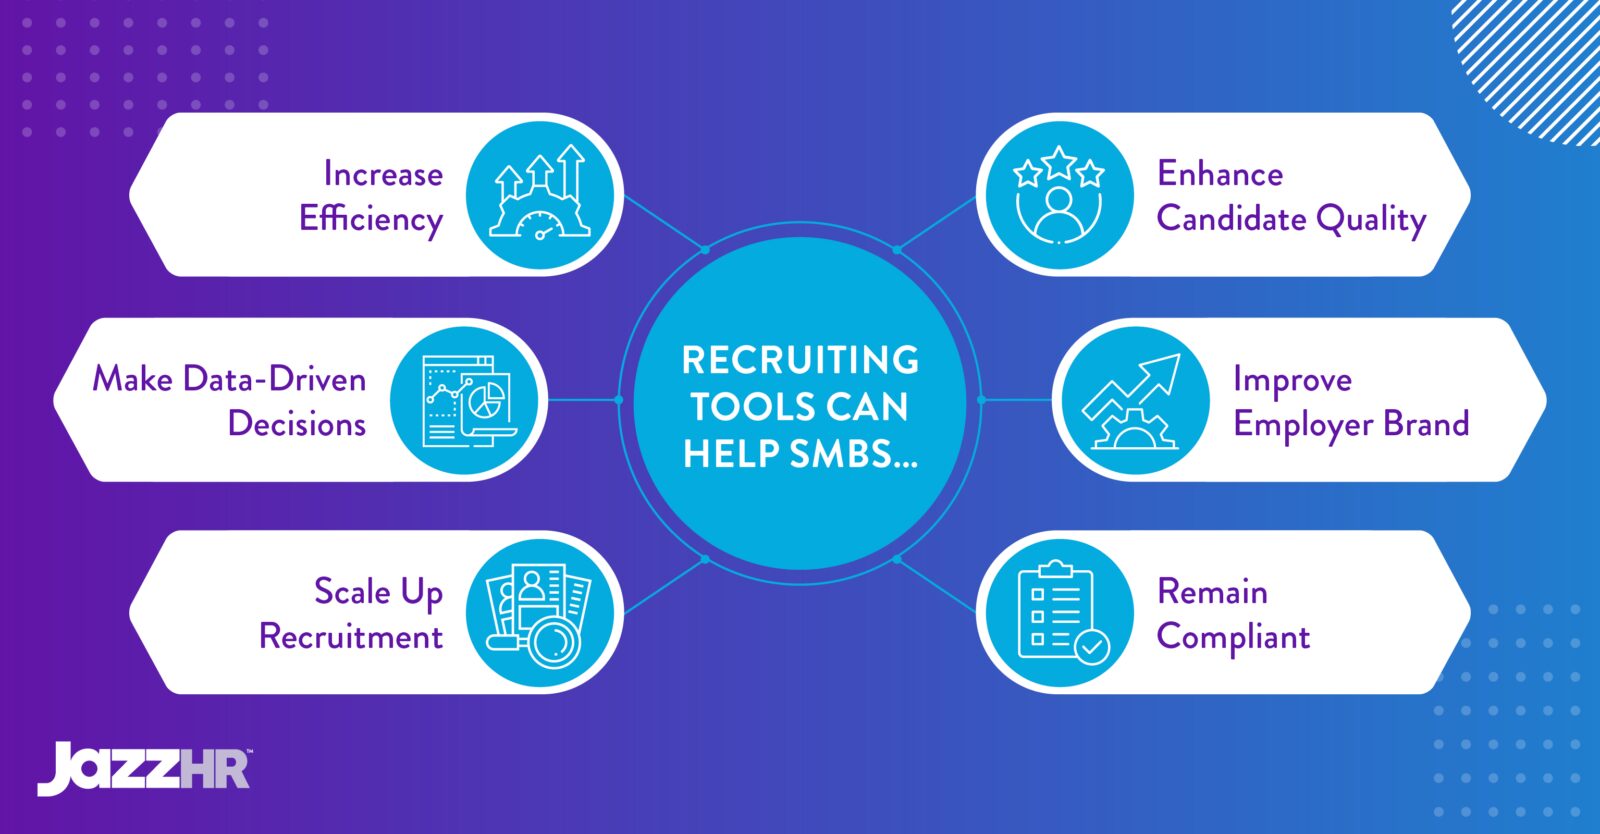 The benefits of recruiting tools (as explained below).